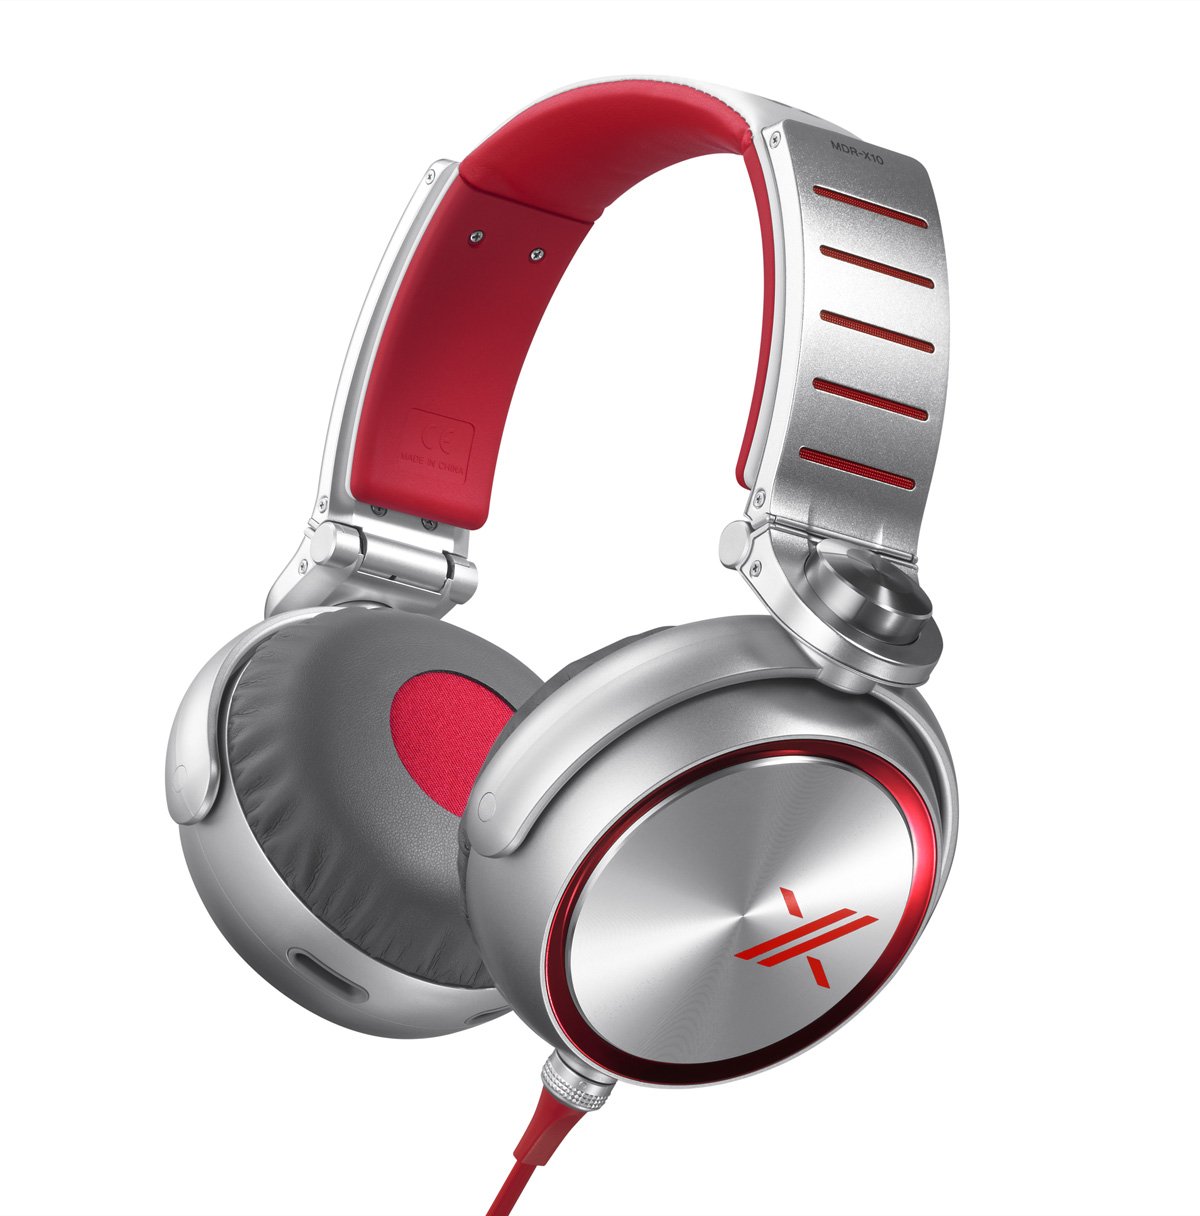 Headphones with a red X